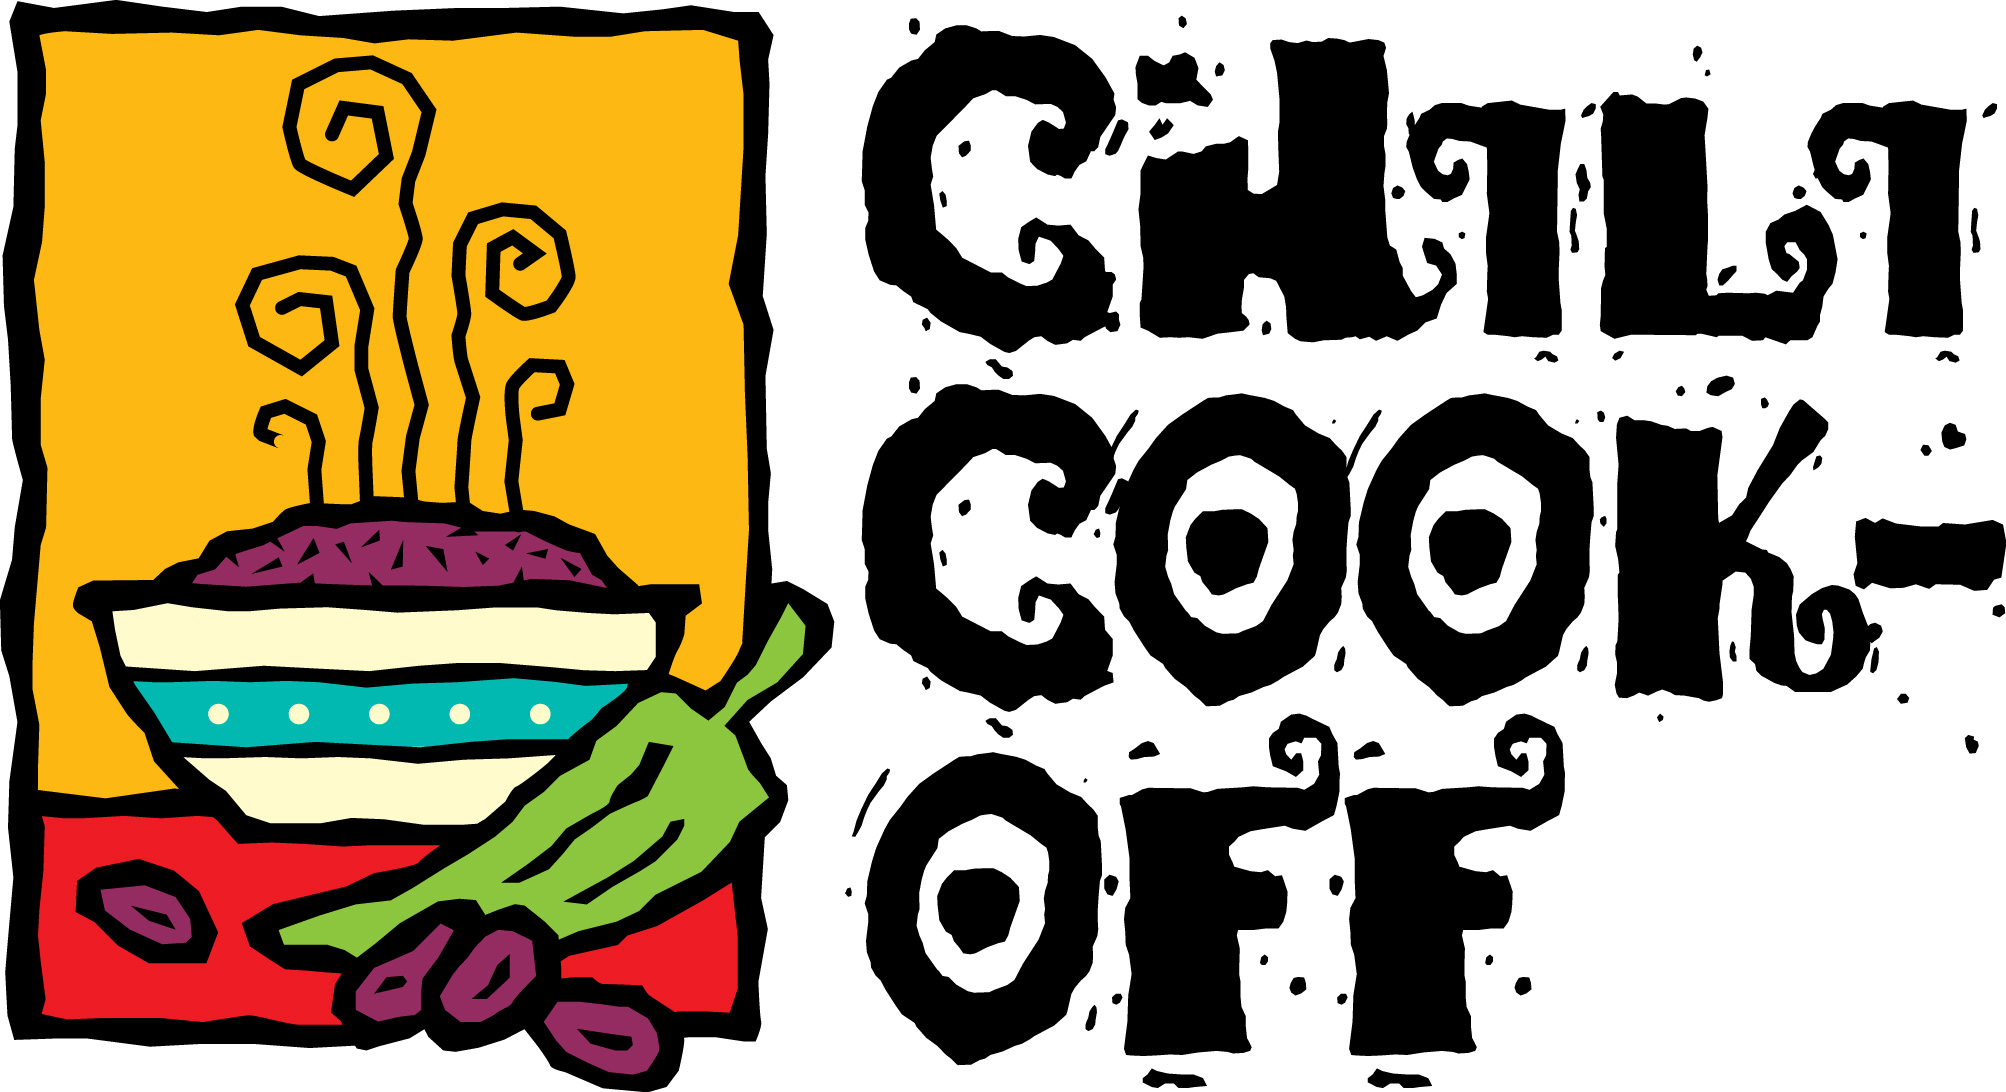 Chili Cook Off Borders Clipart ... A Variety Of Chili Recipes .